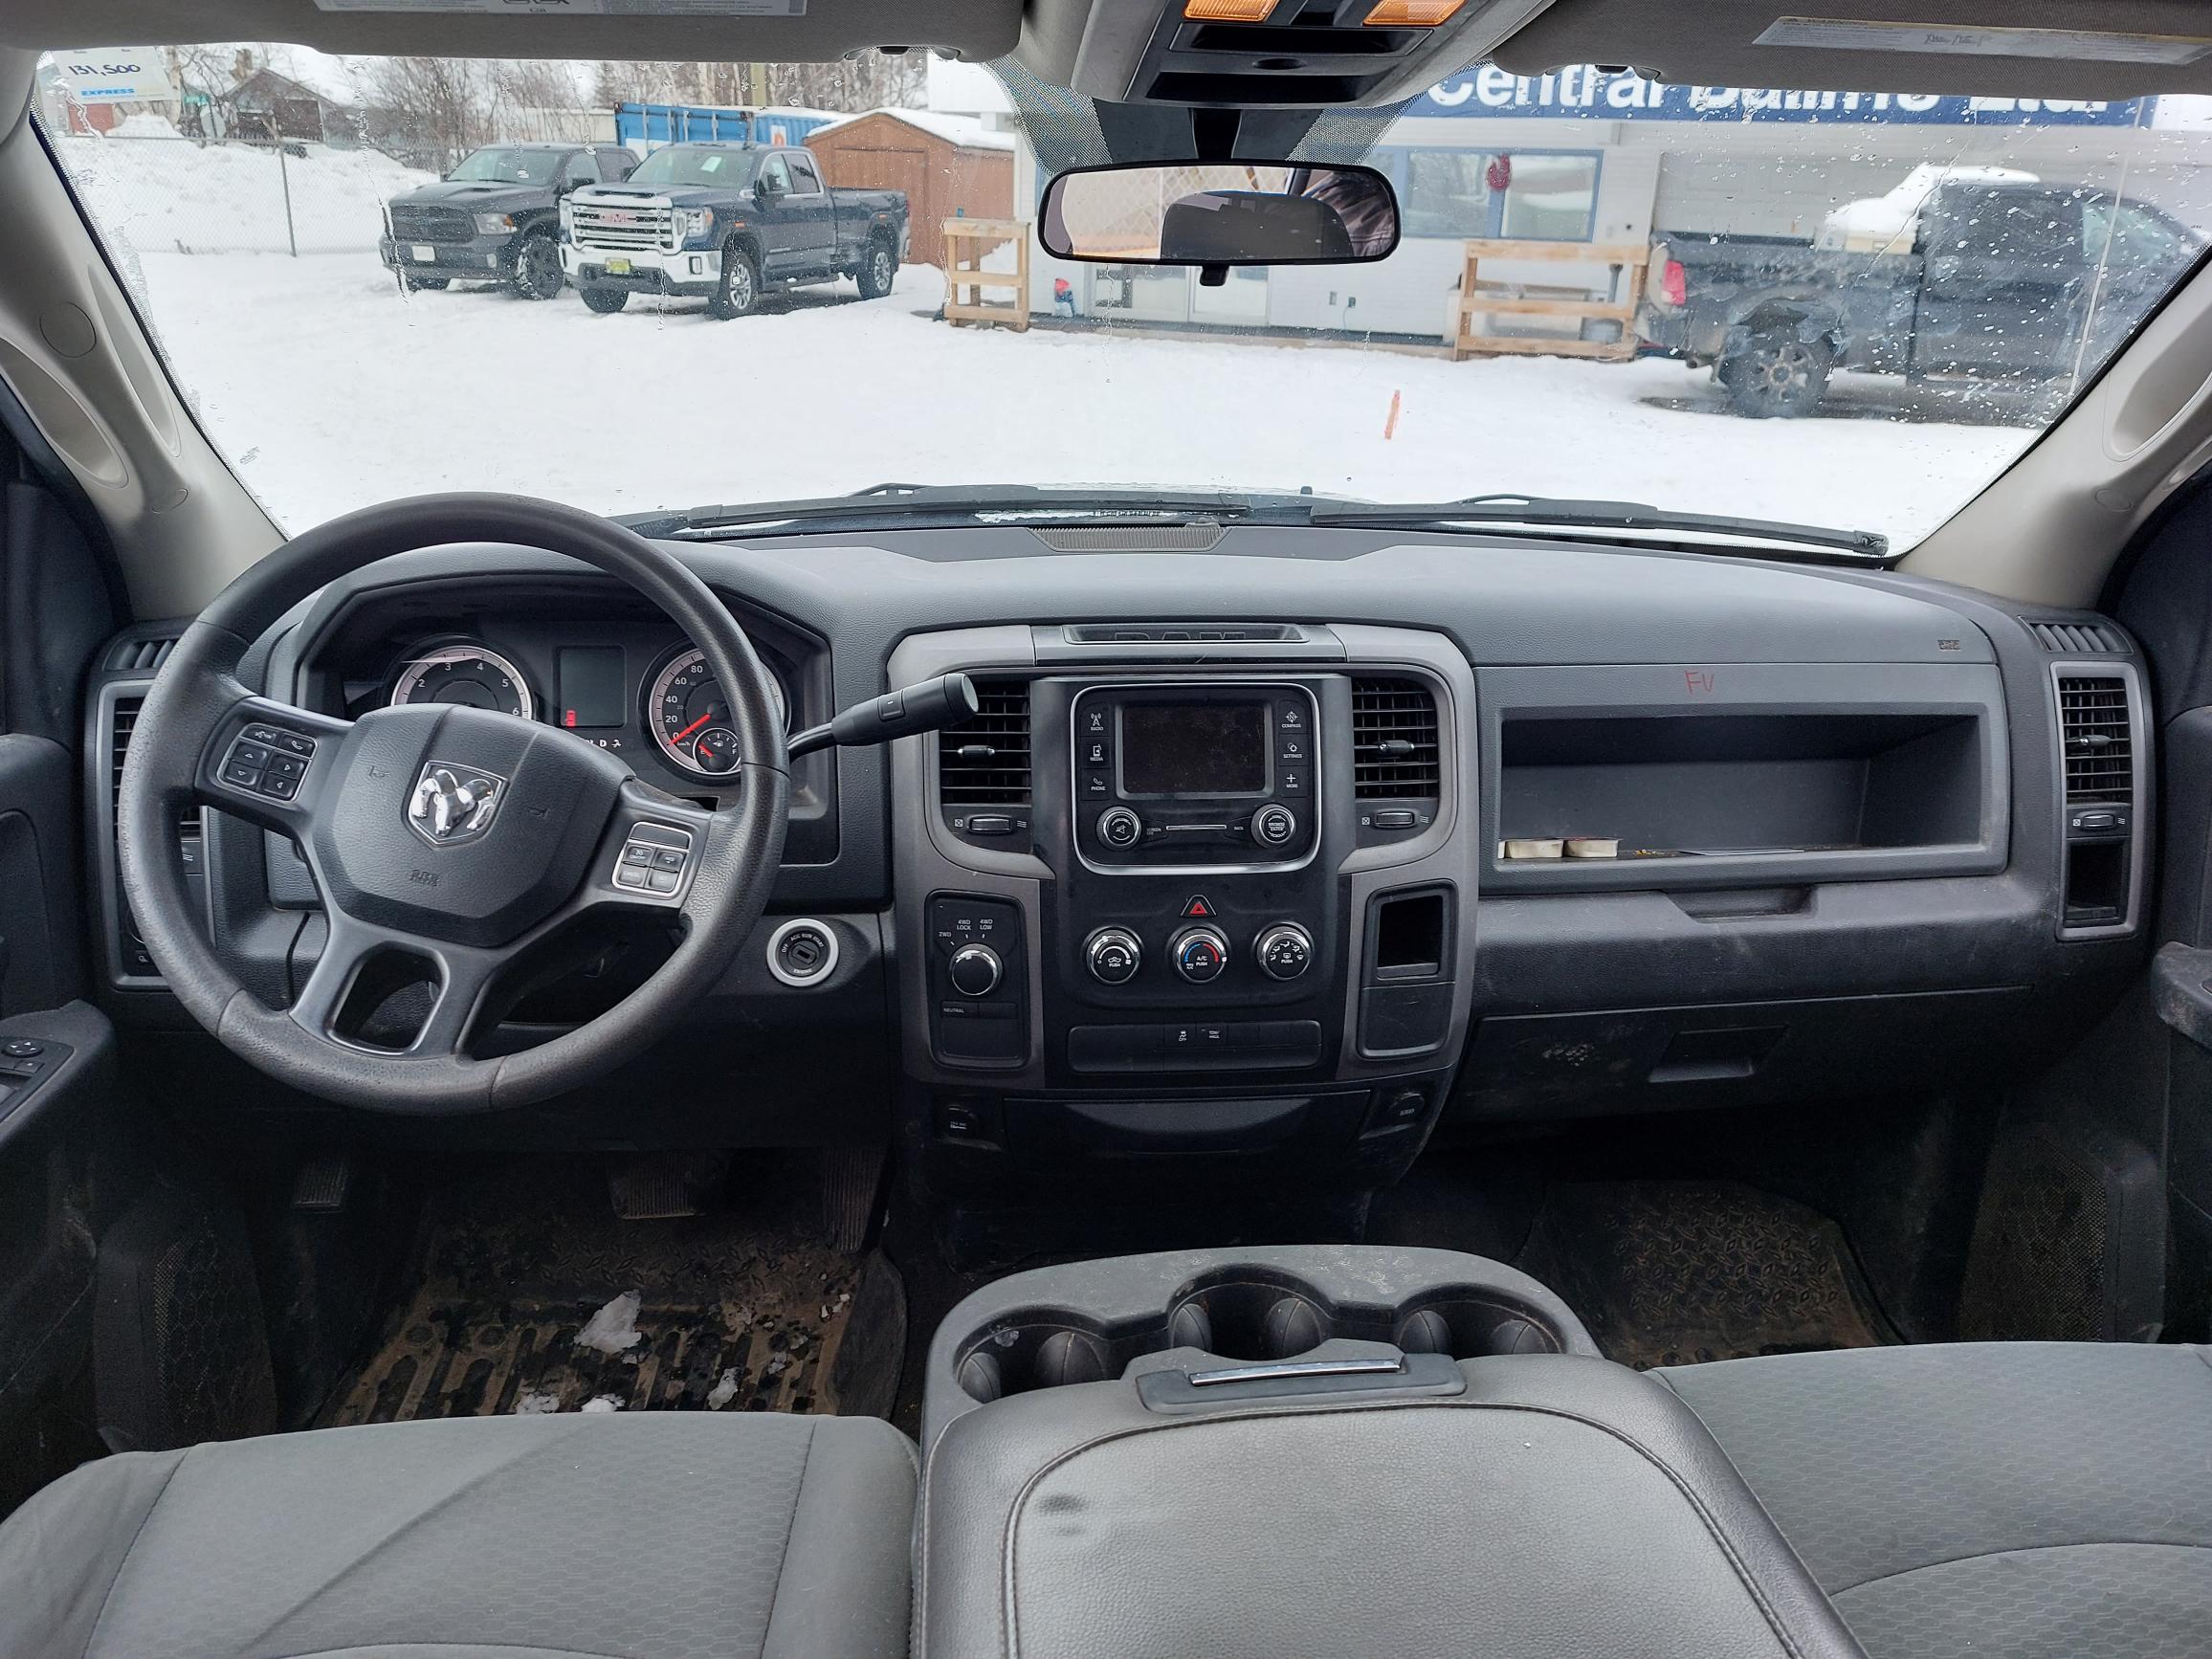 2018 Dodge Ram 1500 #B-PG-0748 Located in Prince George